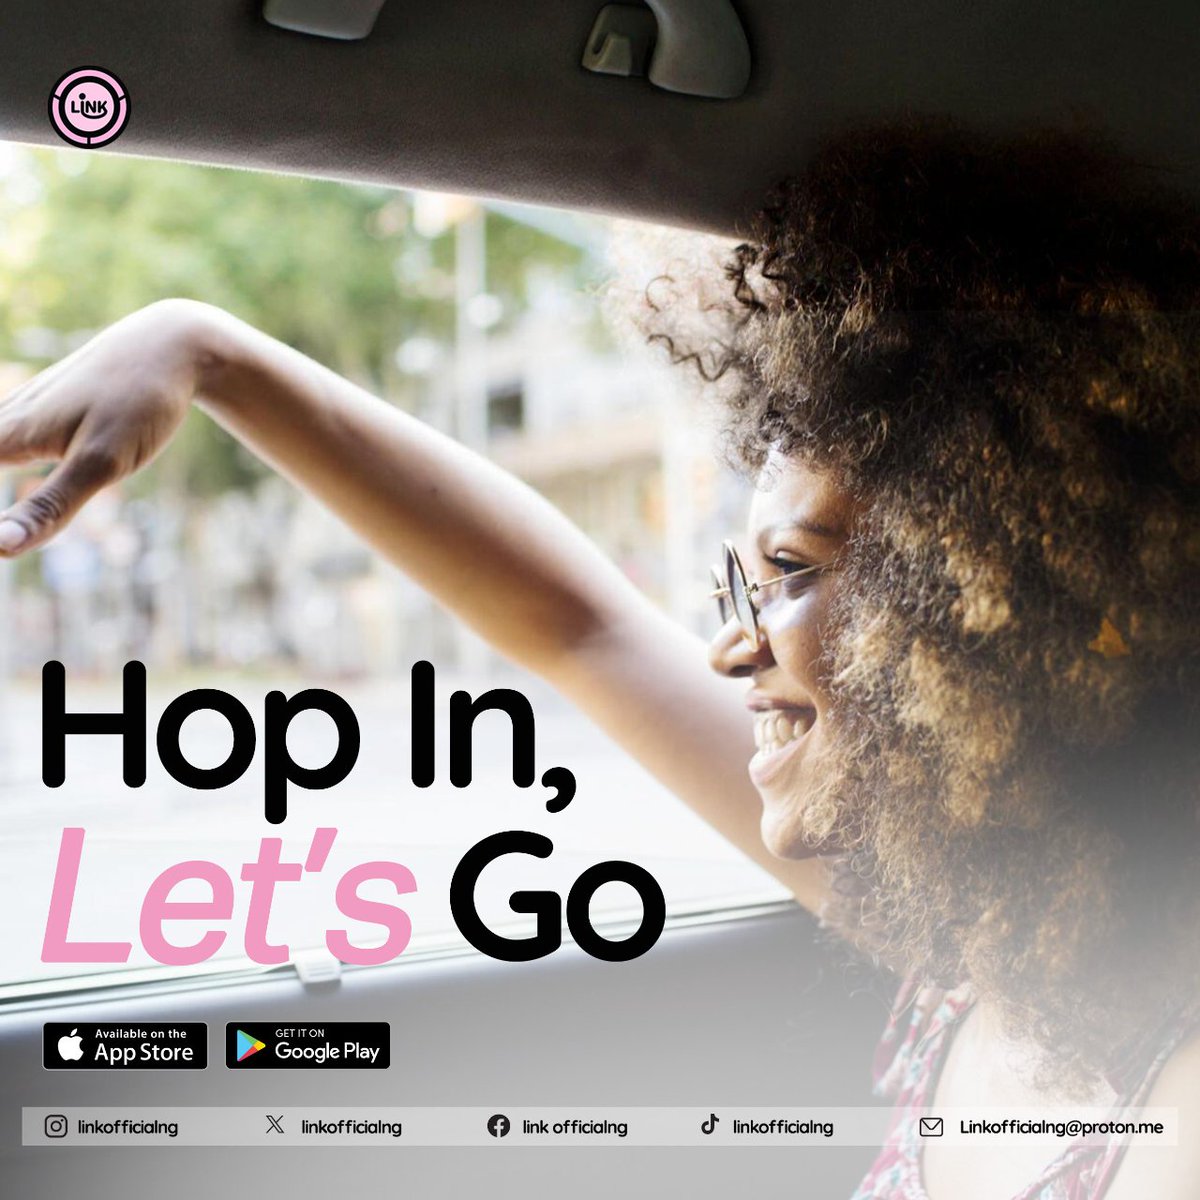 Abuja people, I just tried LinkRide for the first time and I am obsessed! 😍😍 The app is so easy to use and the drivers are top-notch. Getting around has never been easier! #LinkRide #Rideshare #AbujaTwitterCommunity 🚗💨 @linkofficialng